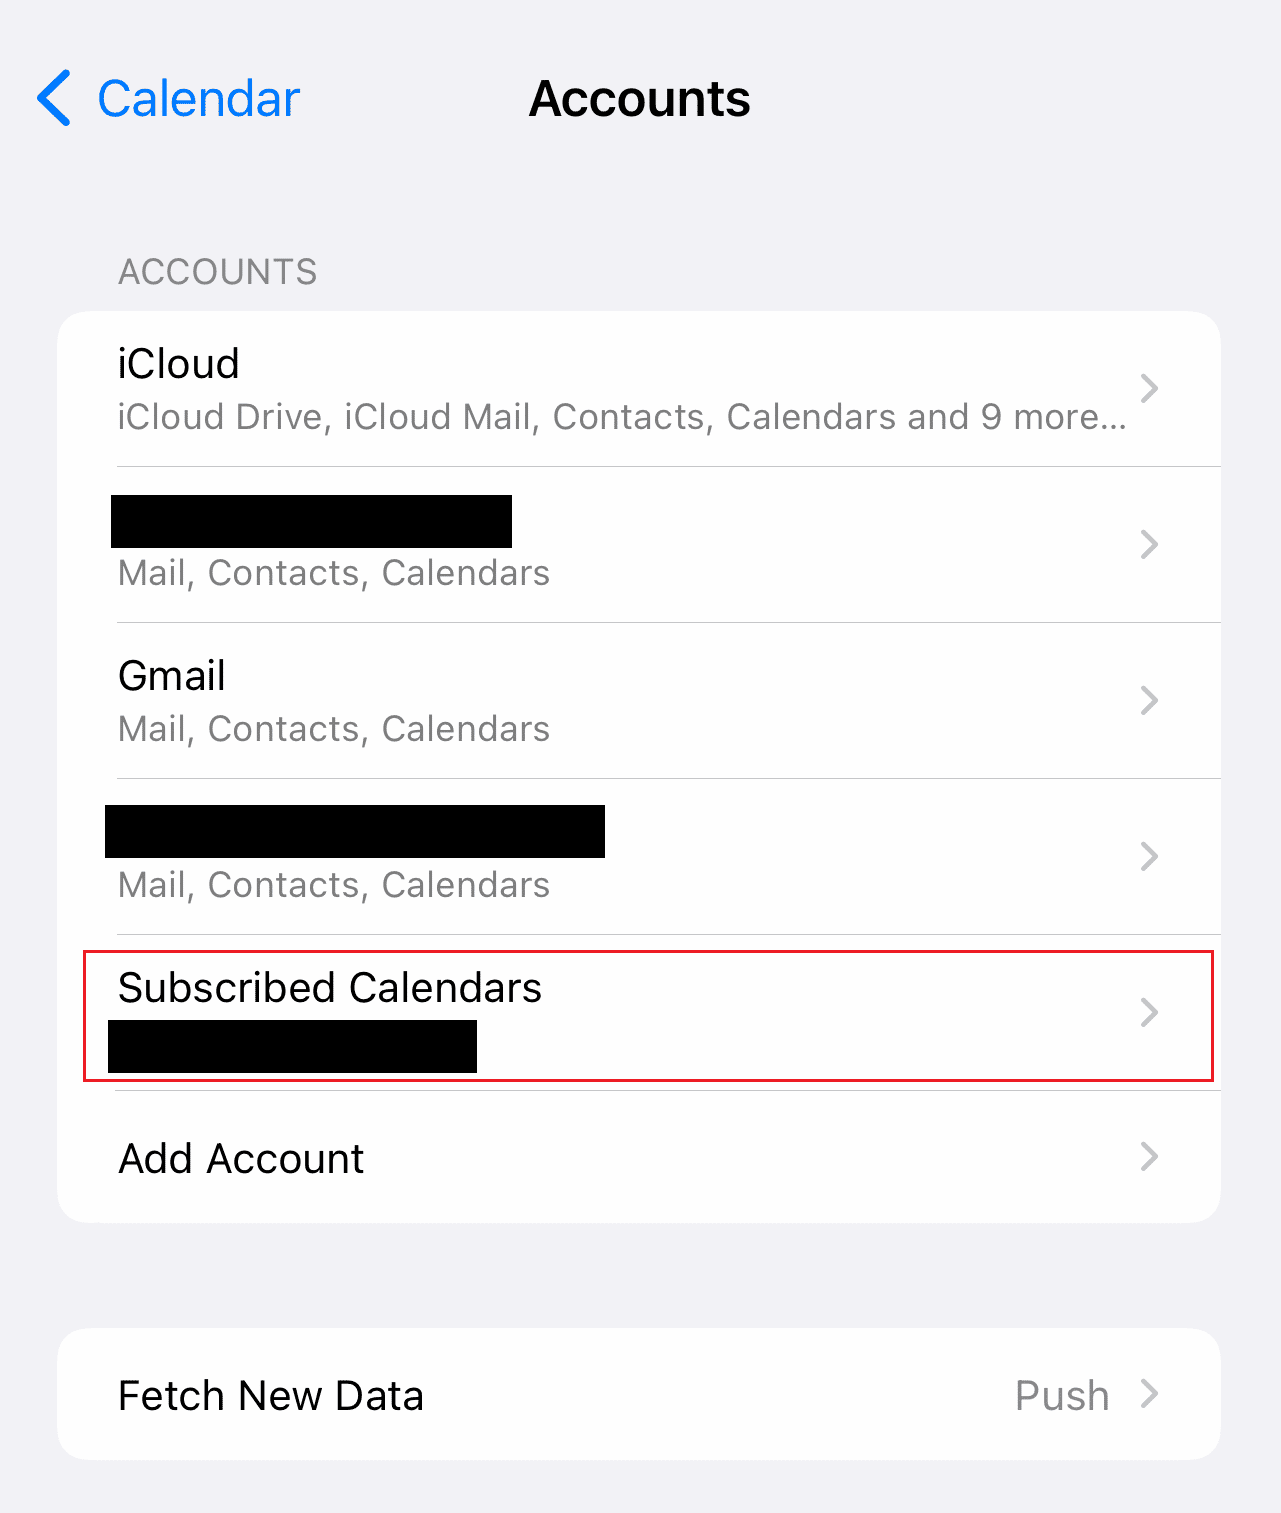 Tap on the Subscribed Calendars - spam account that sends the spam events on your Calendar app